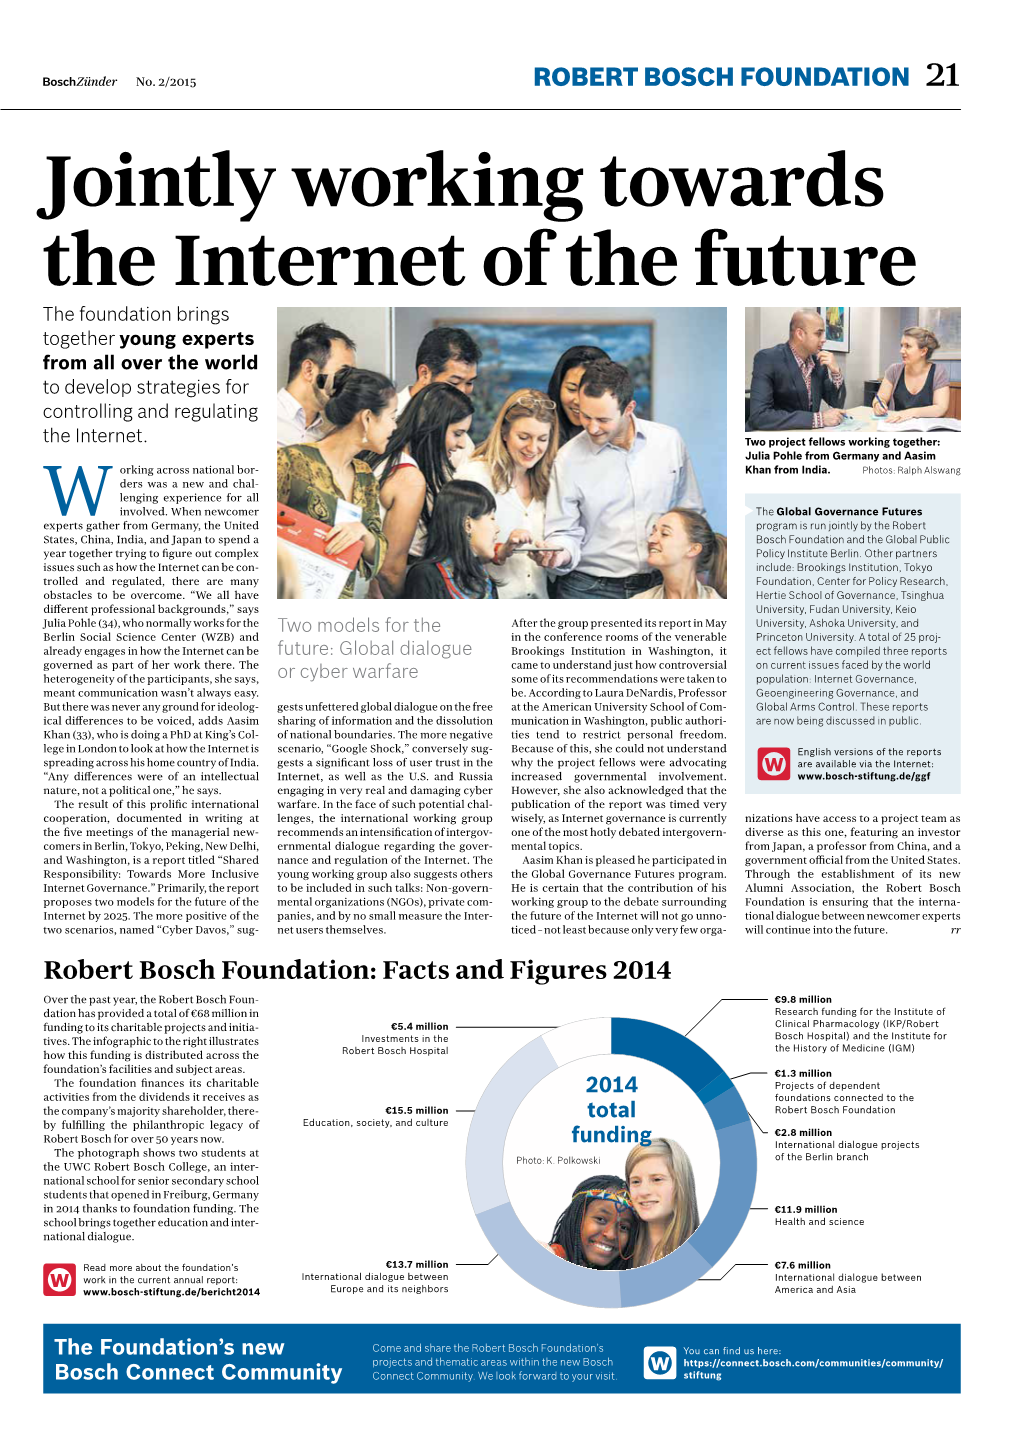 Jointly Working Towards the Internet of the Future